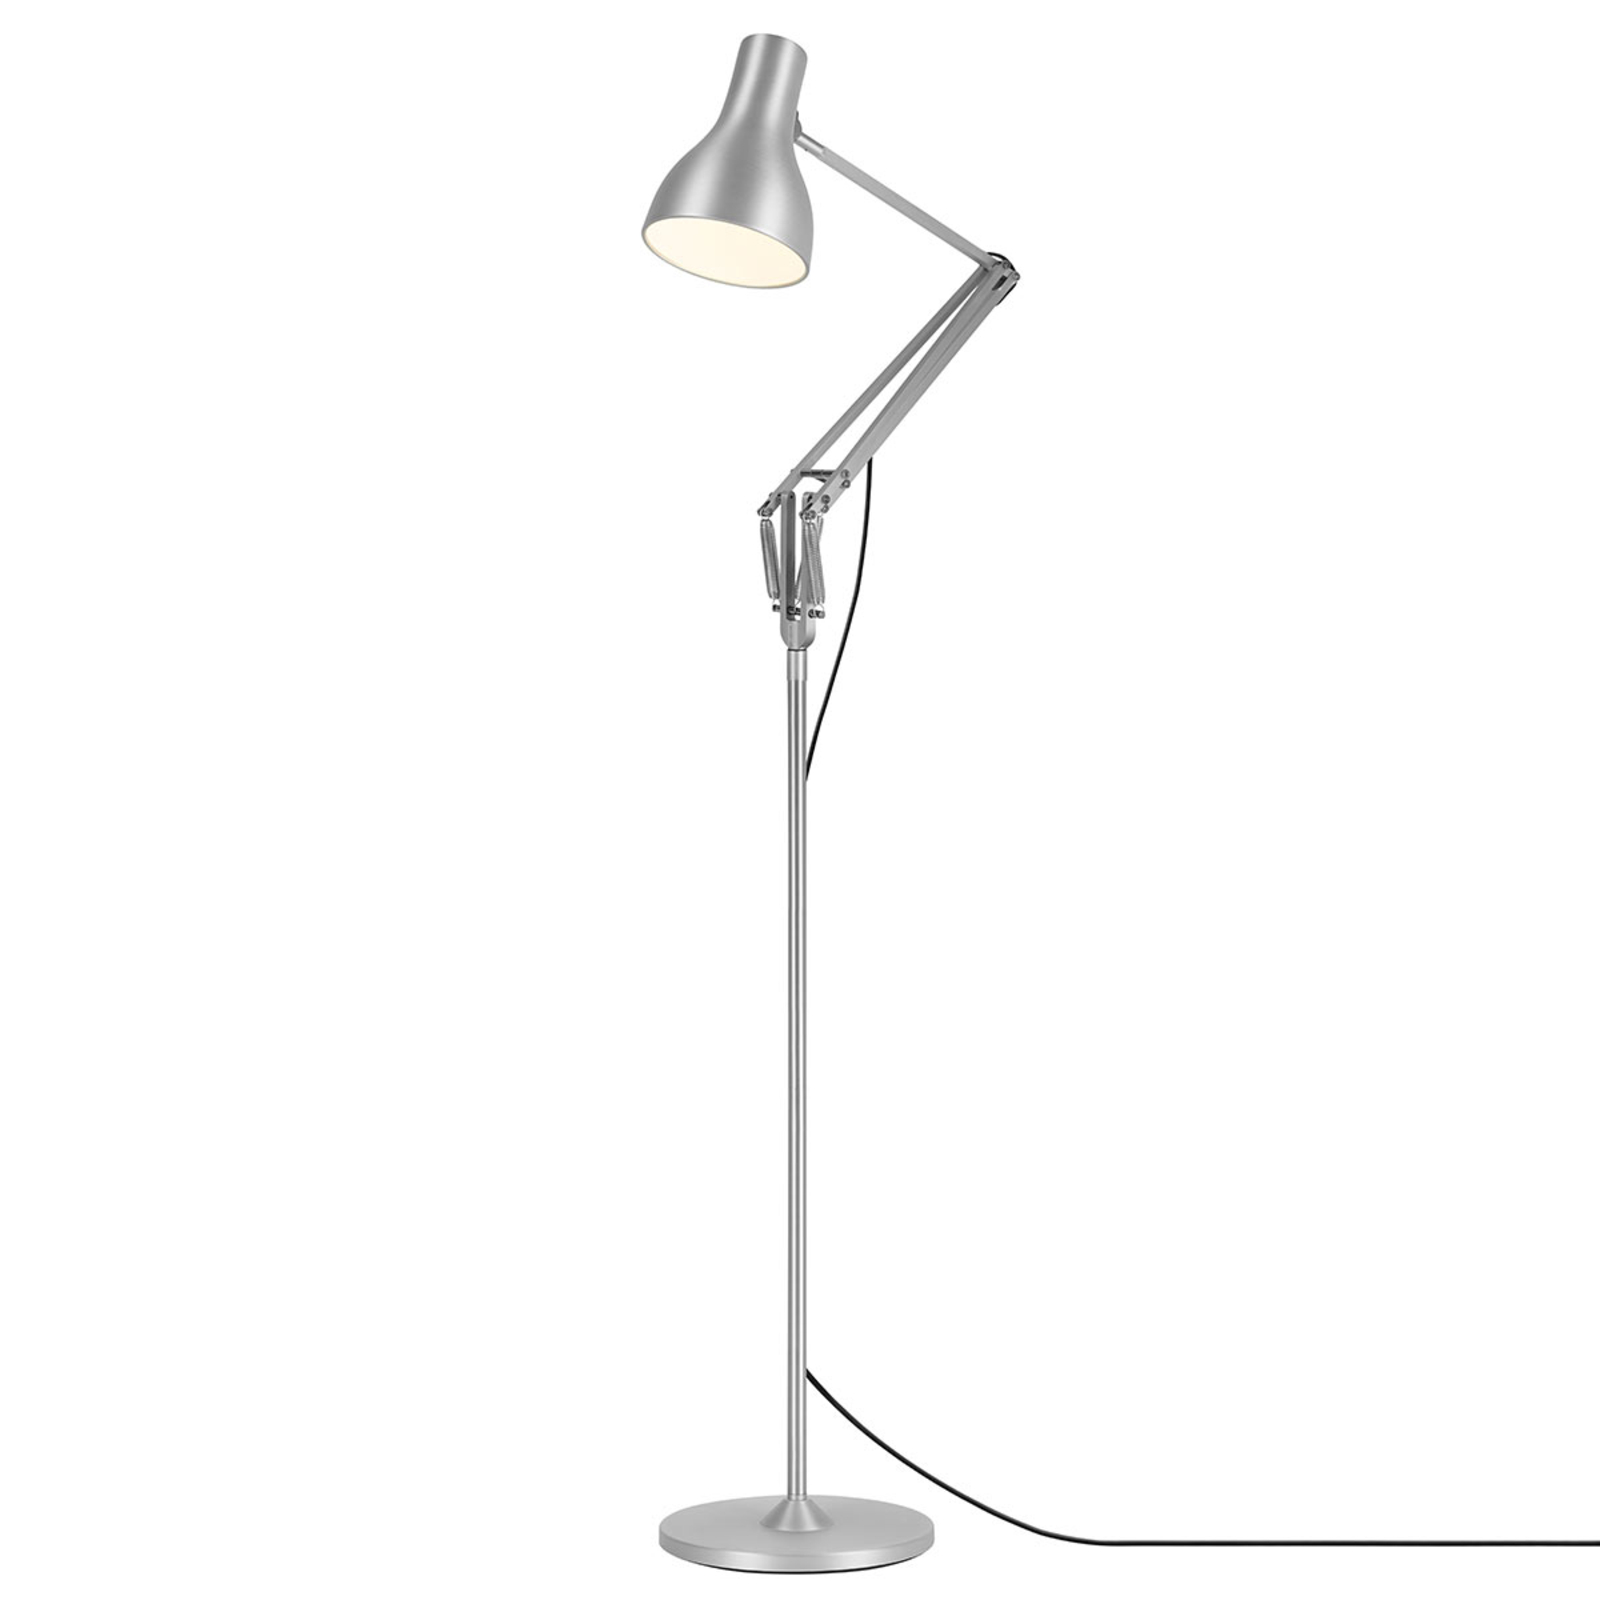 Anglepoise Type 75 floor lamp silver